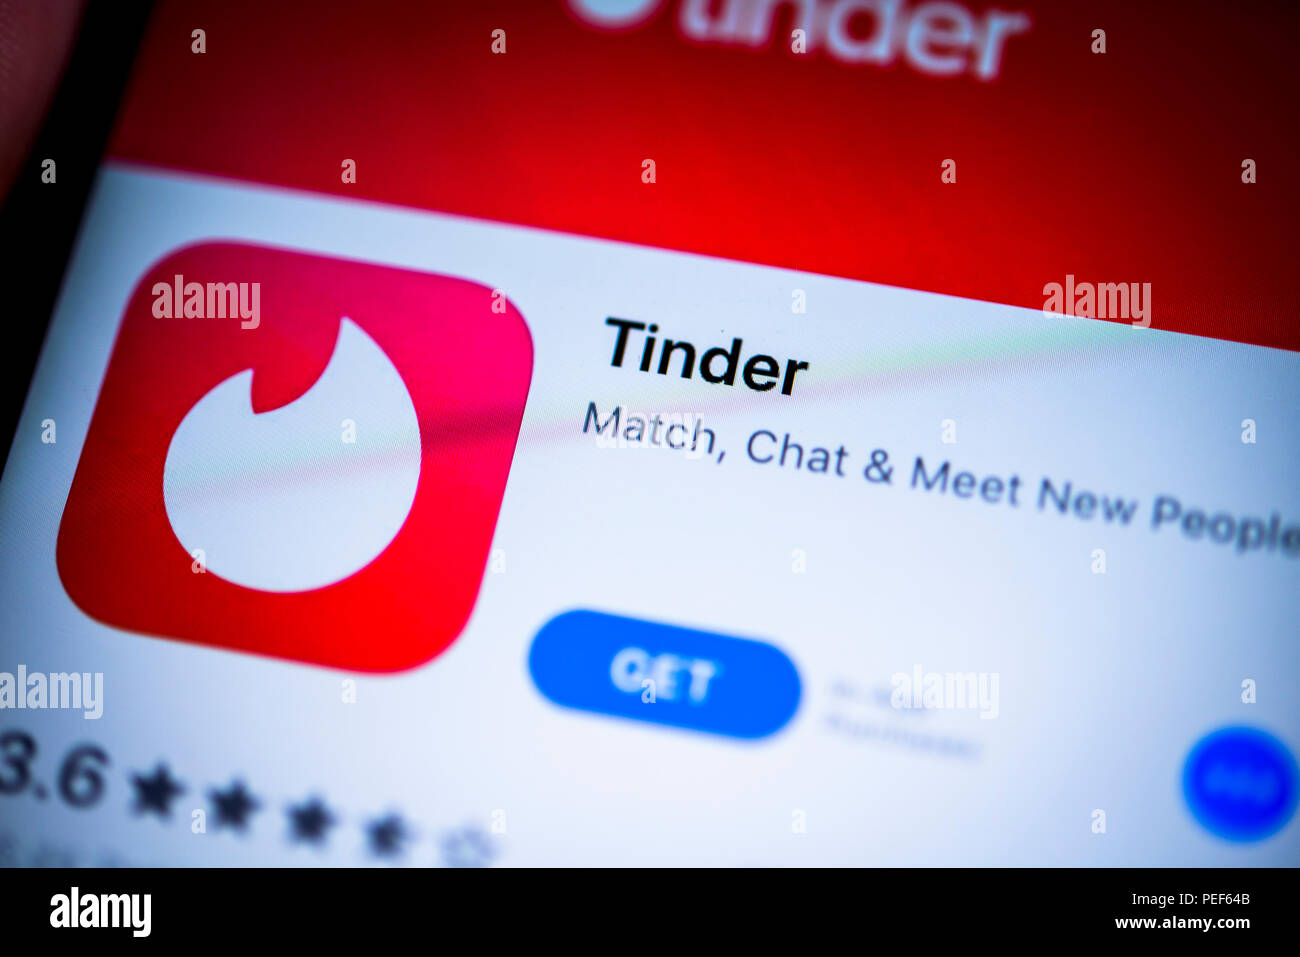 Tinder, online dating app in the Apple App Store, app icon, display, iPhone, iOS, smartphone, display, close-up, detail, Germany Stock Photo